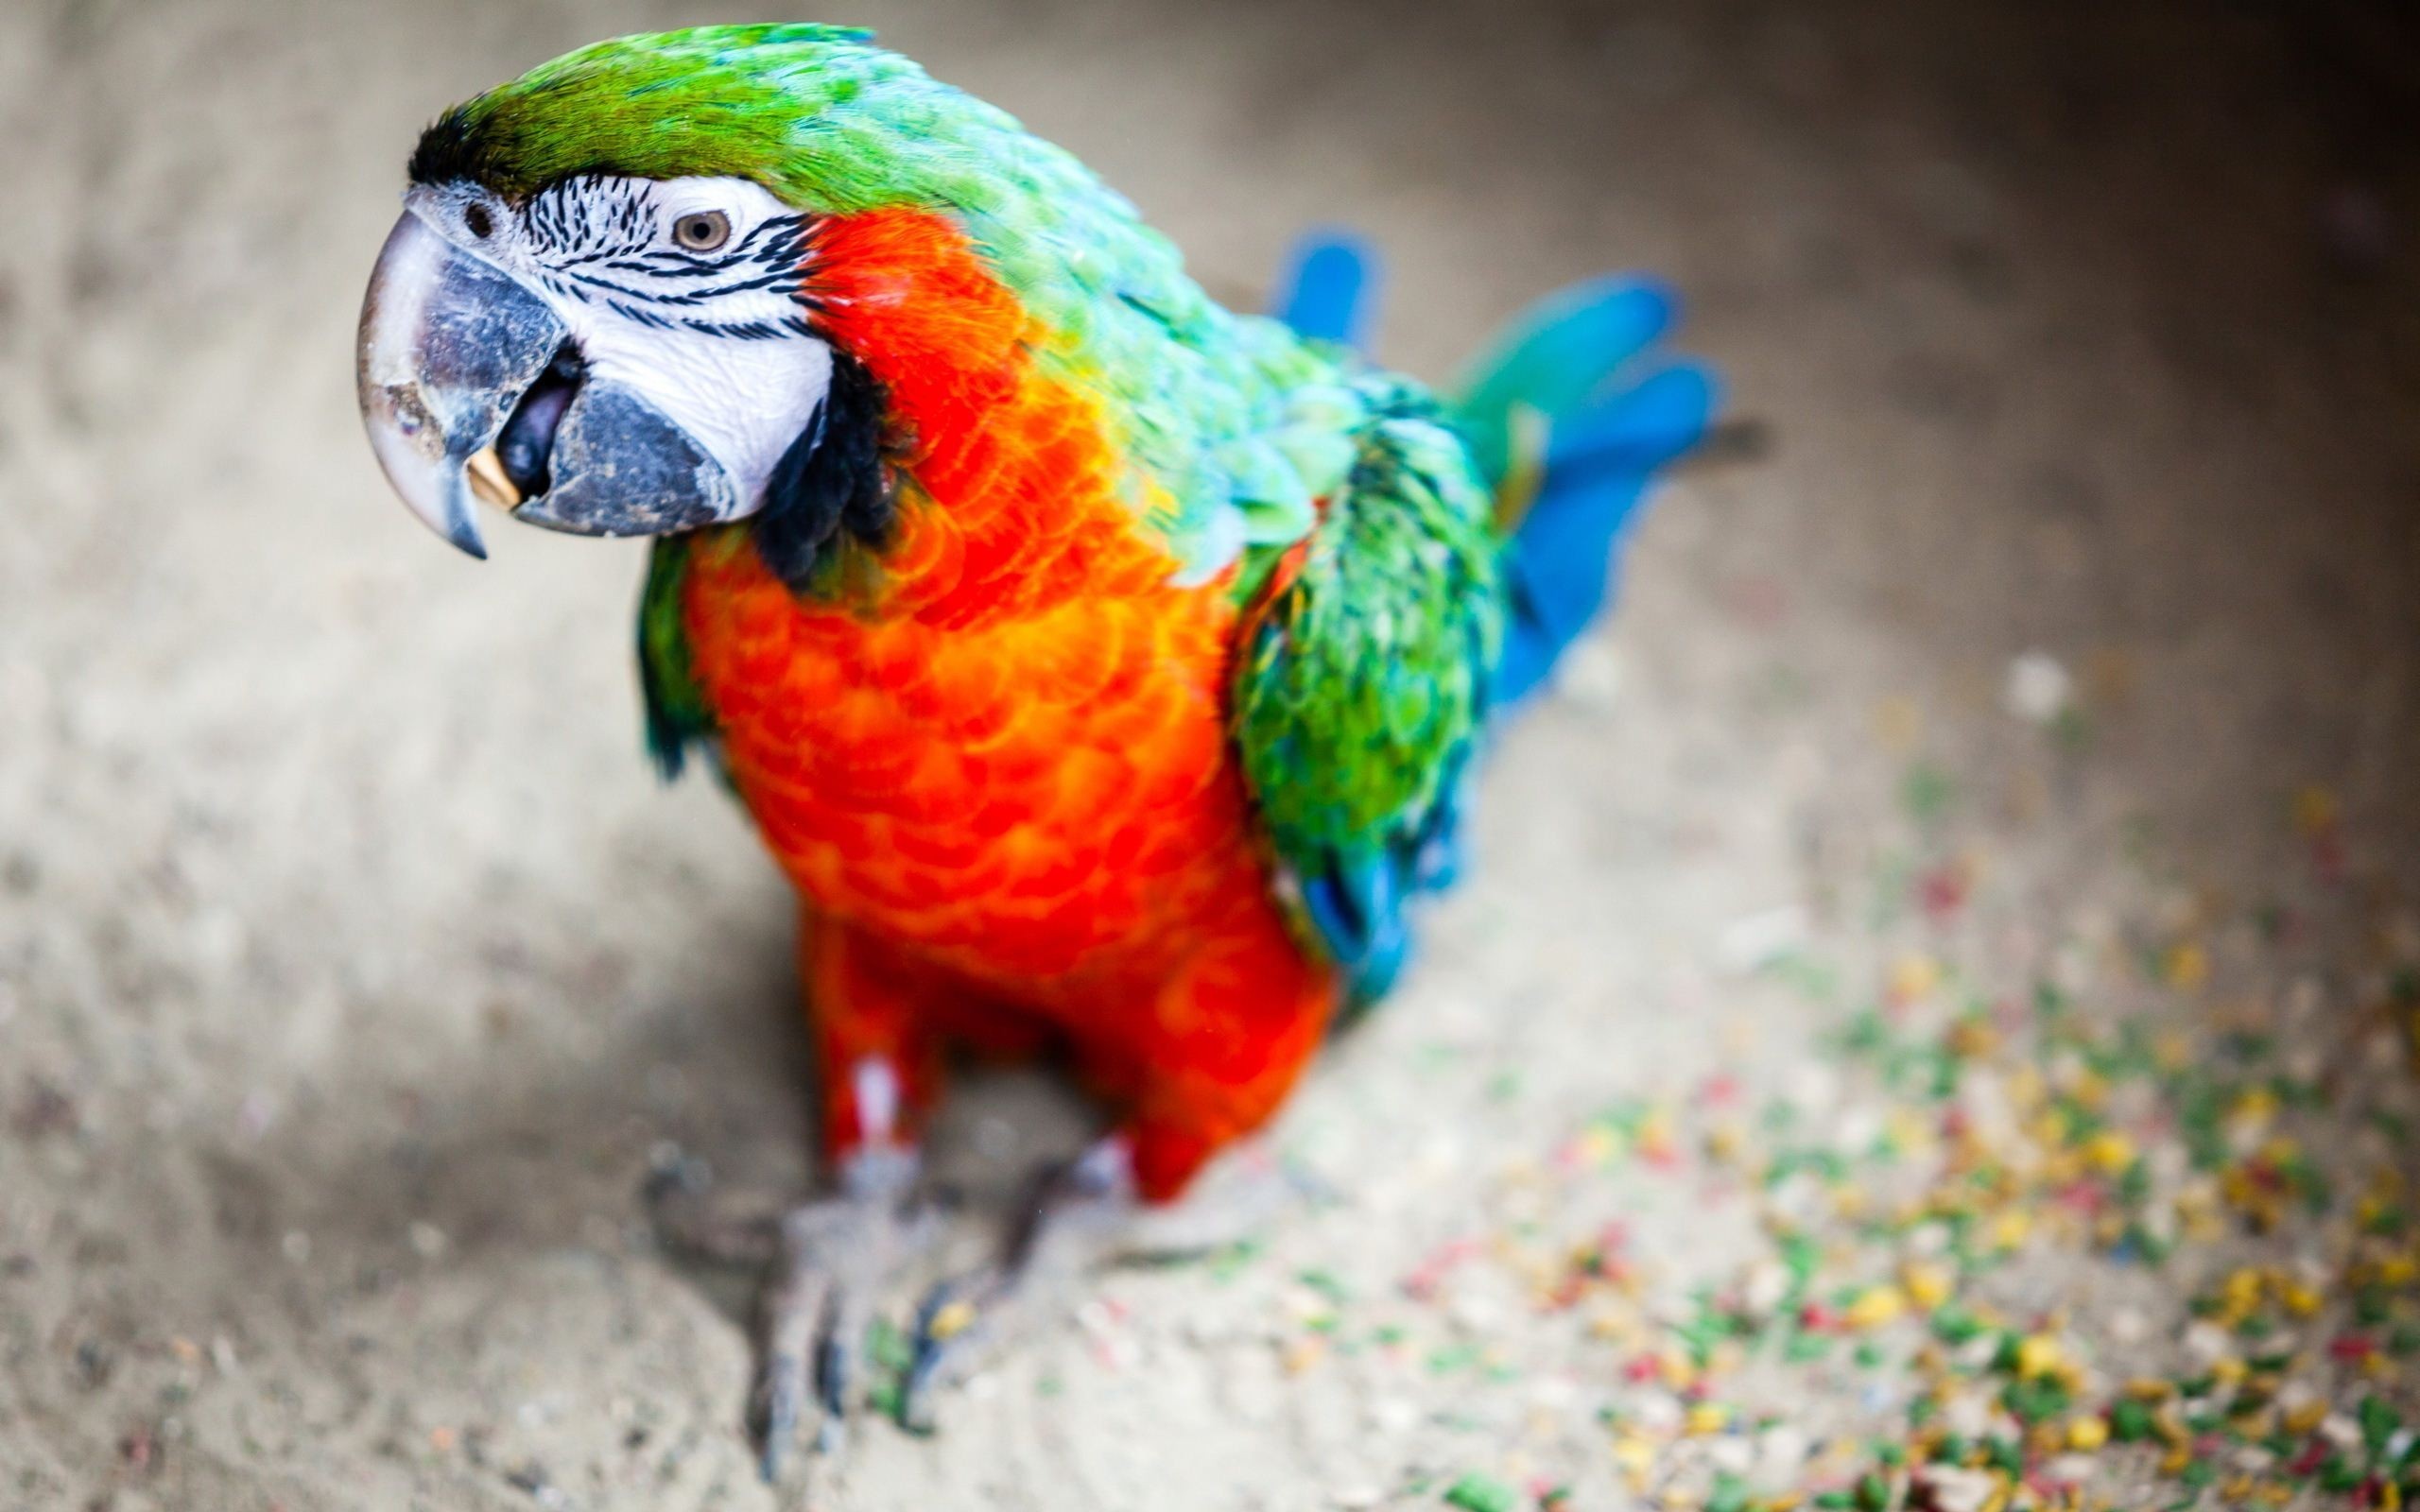 General 2560x1600 animals parrot colorful blurred birds depth of field macaws catalina macaw